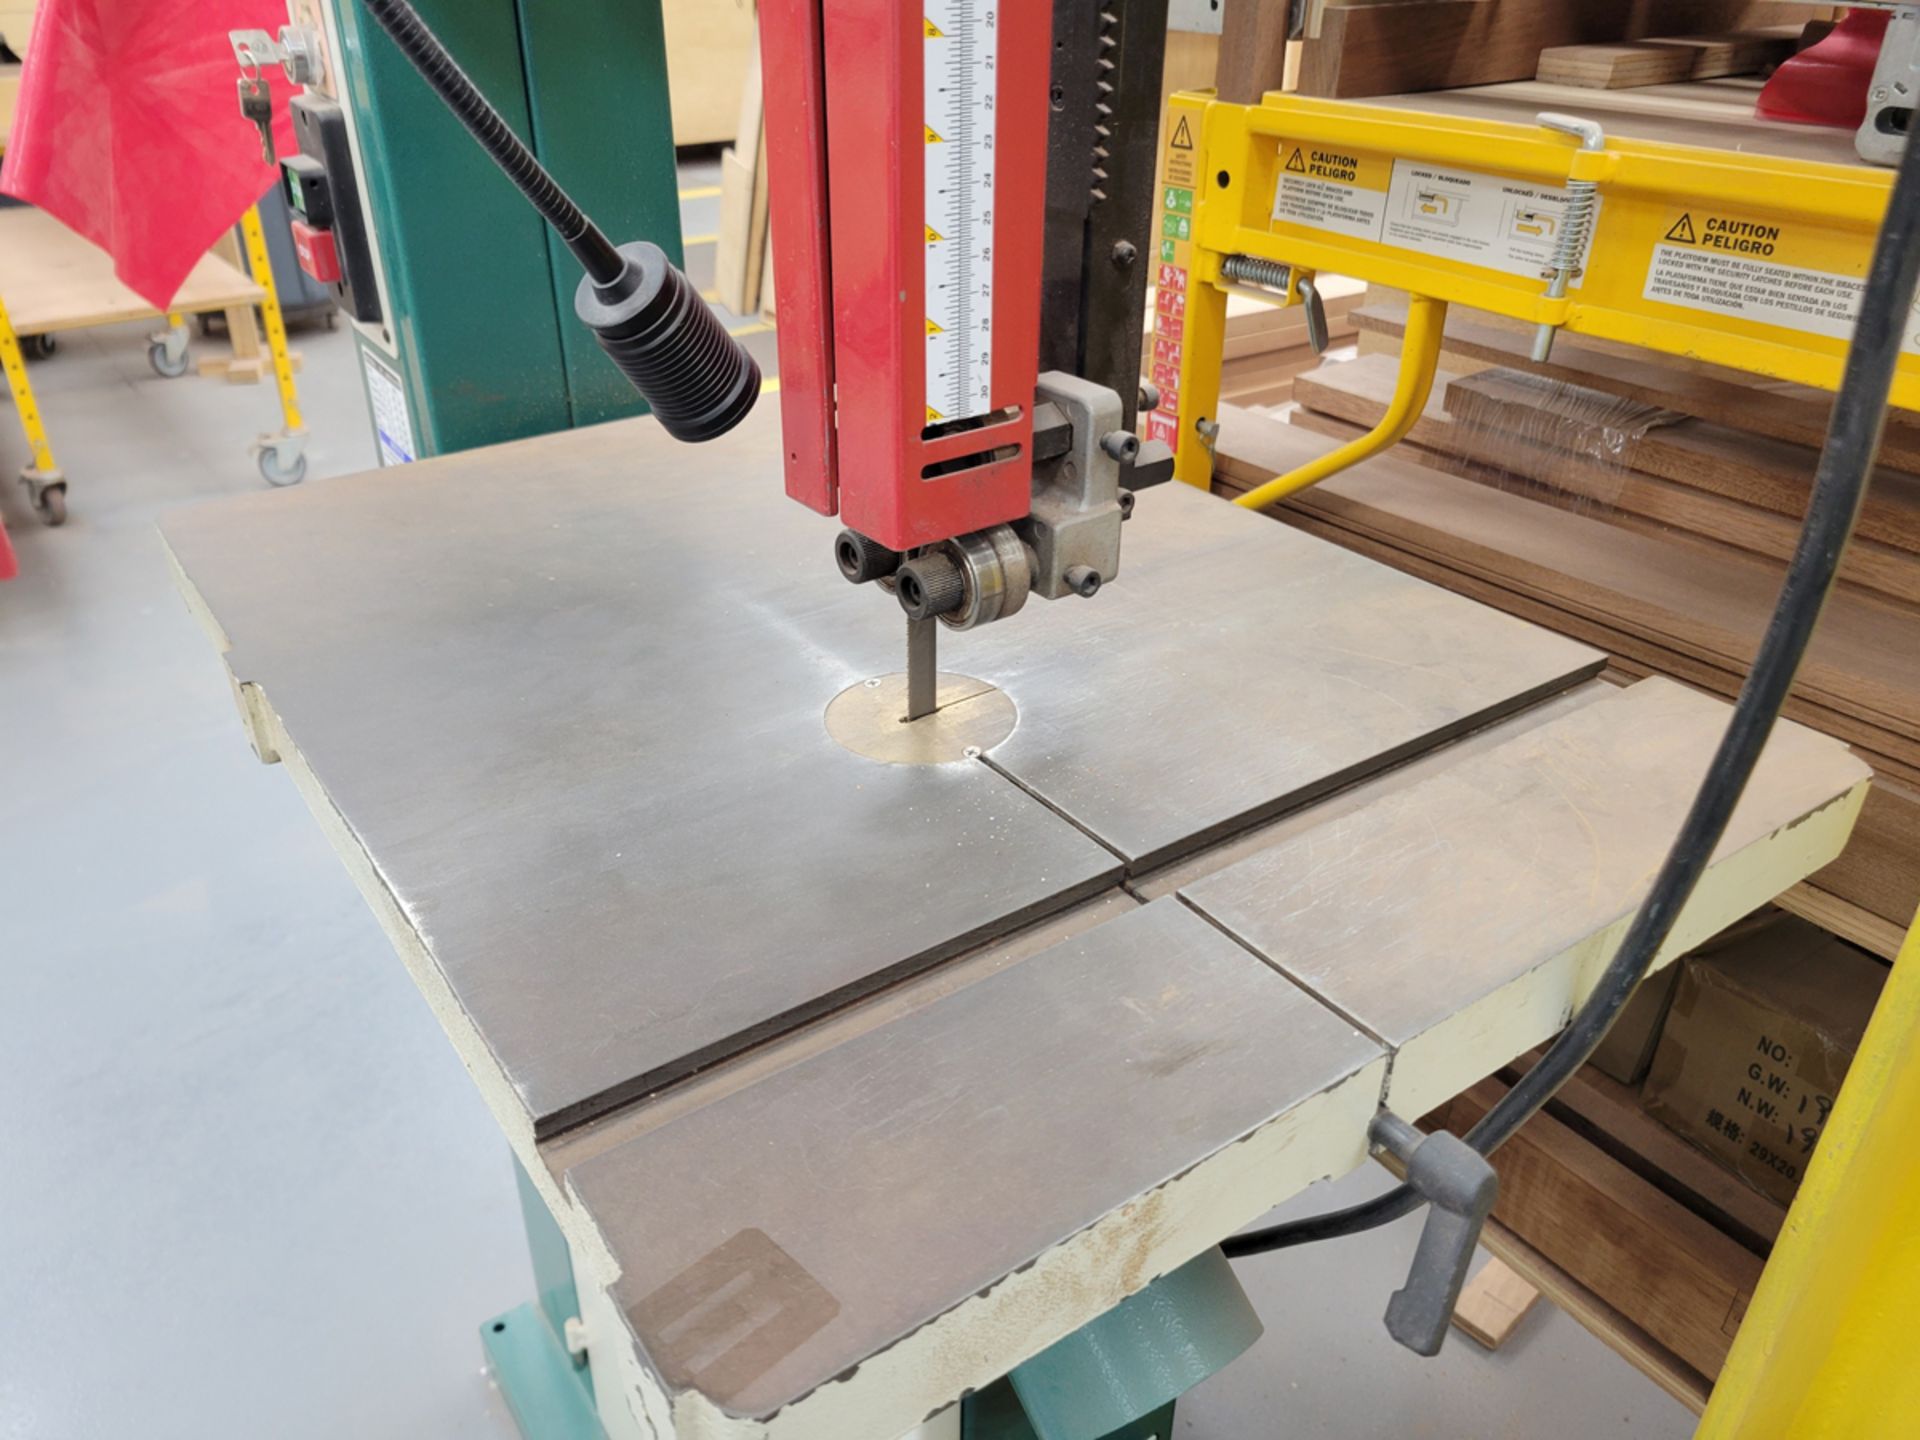 Grizzly Industrial Model: G0640X 17" Variable Speed Wood/Metal Cutting Bandsaw - Image 7 of 11